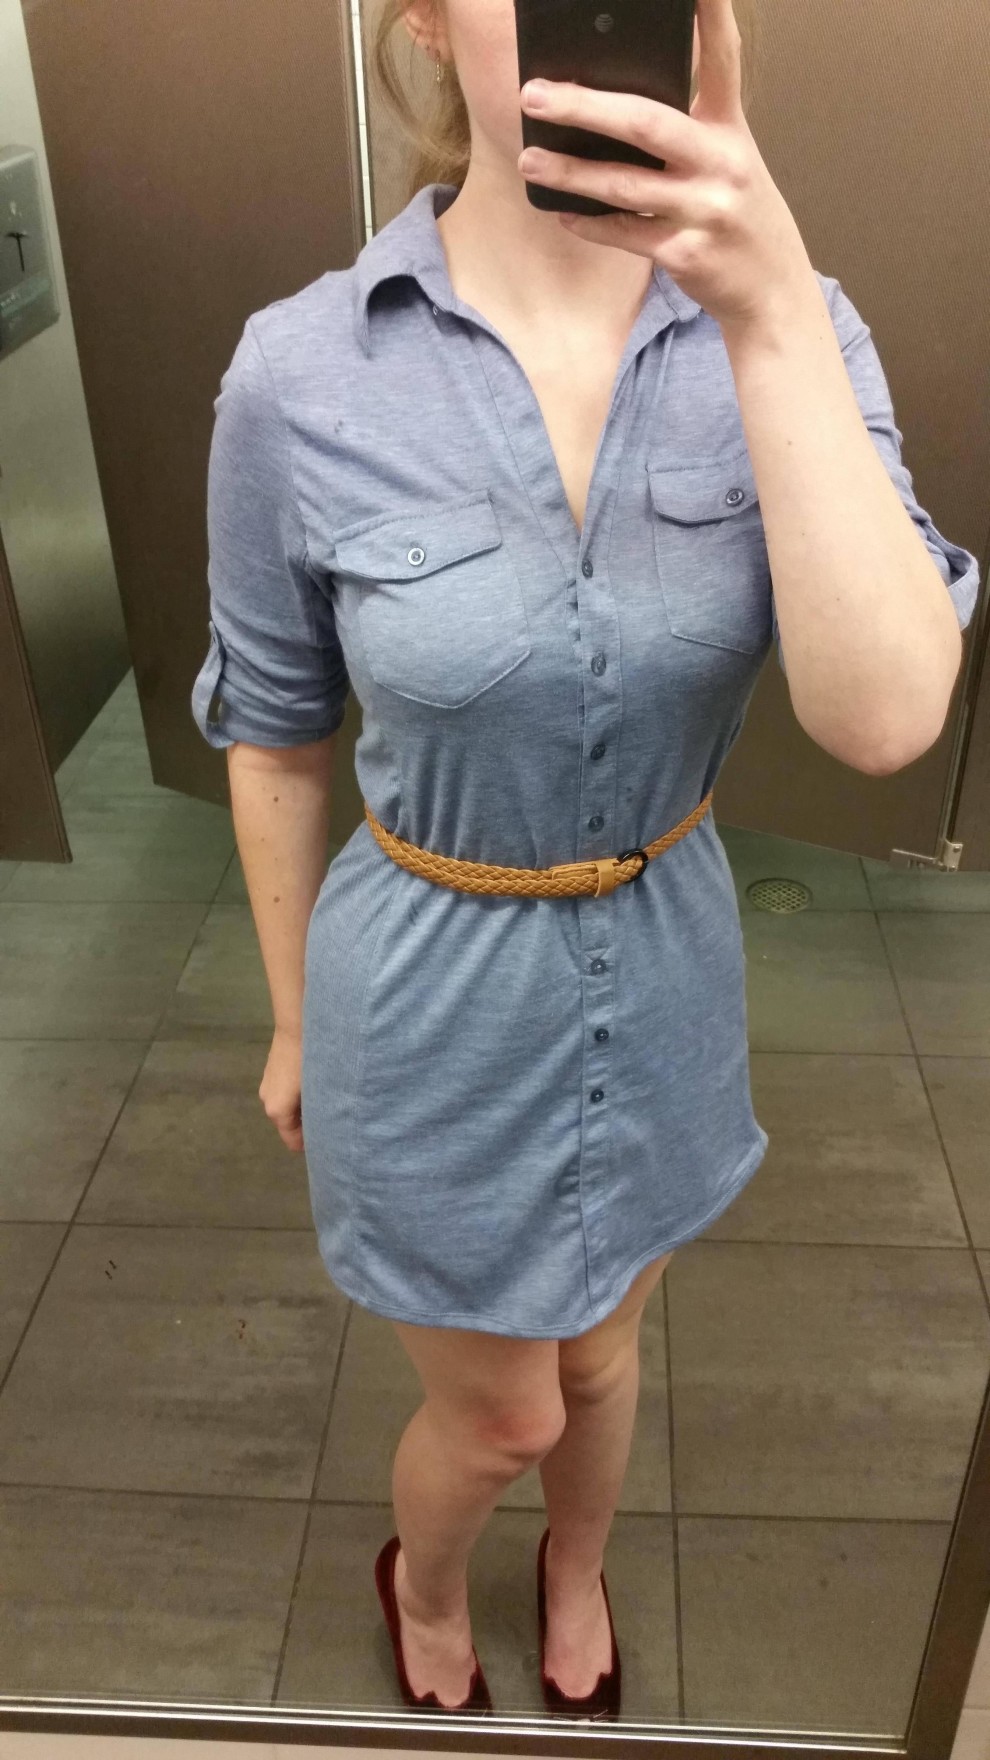 My pro[f]essor said my outfit was inappropriate for class